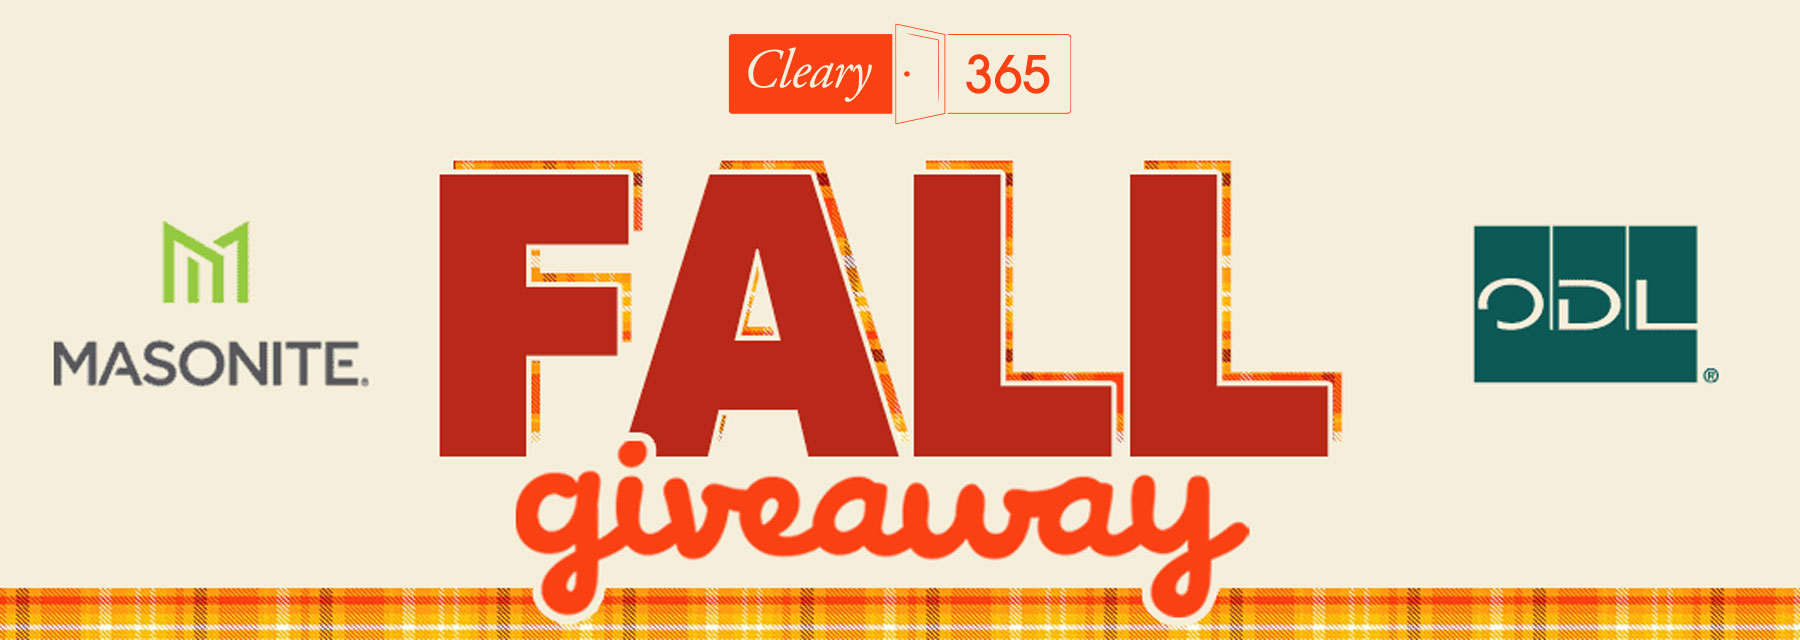 Cleary 365 Fall Promotion